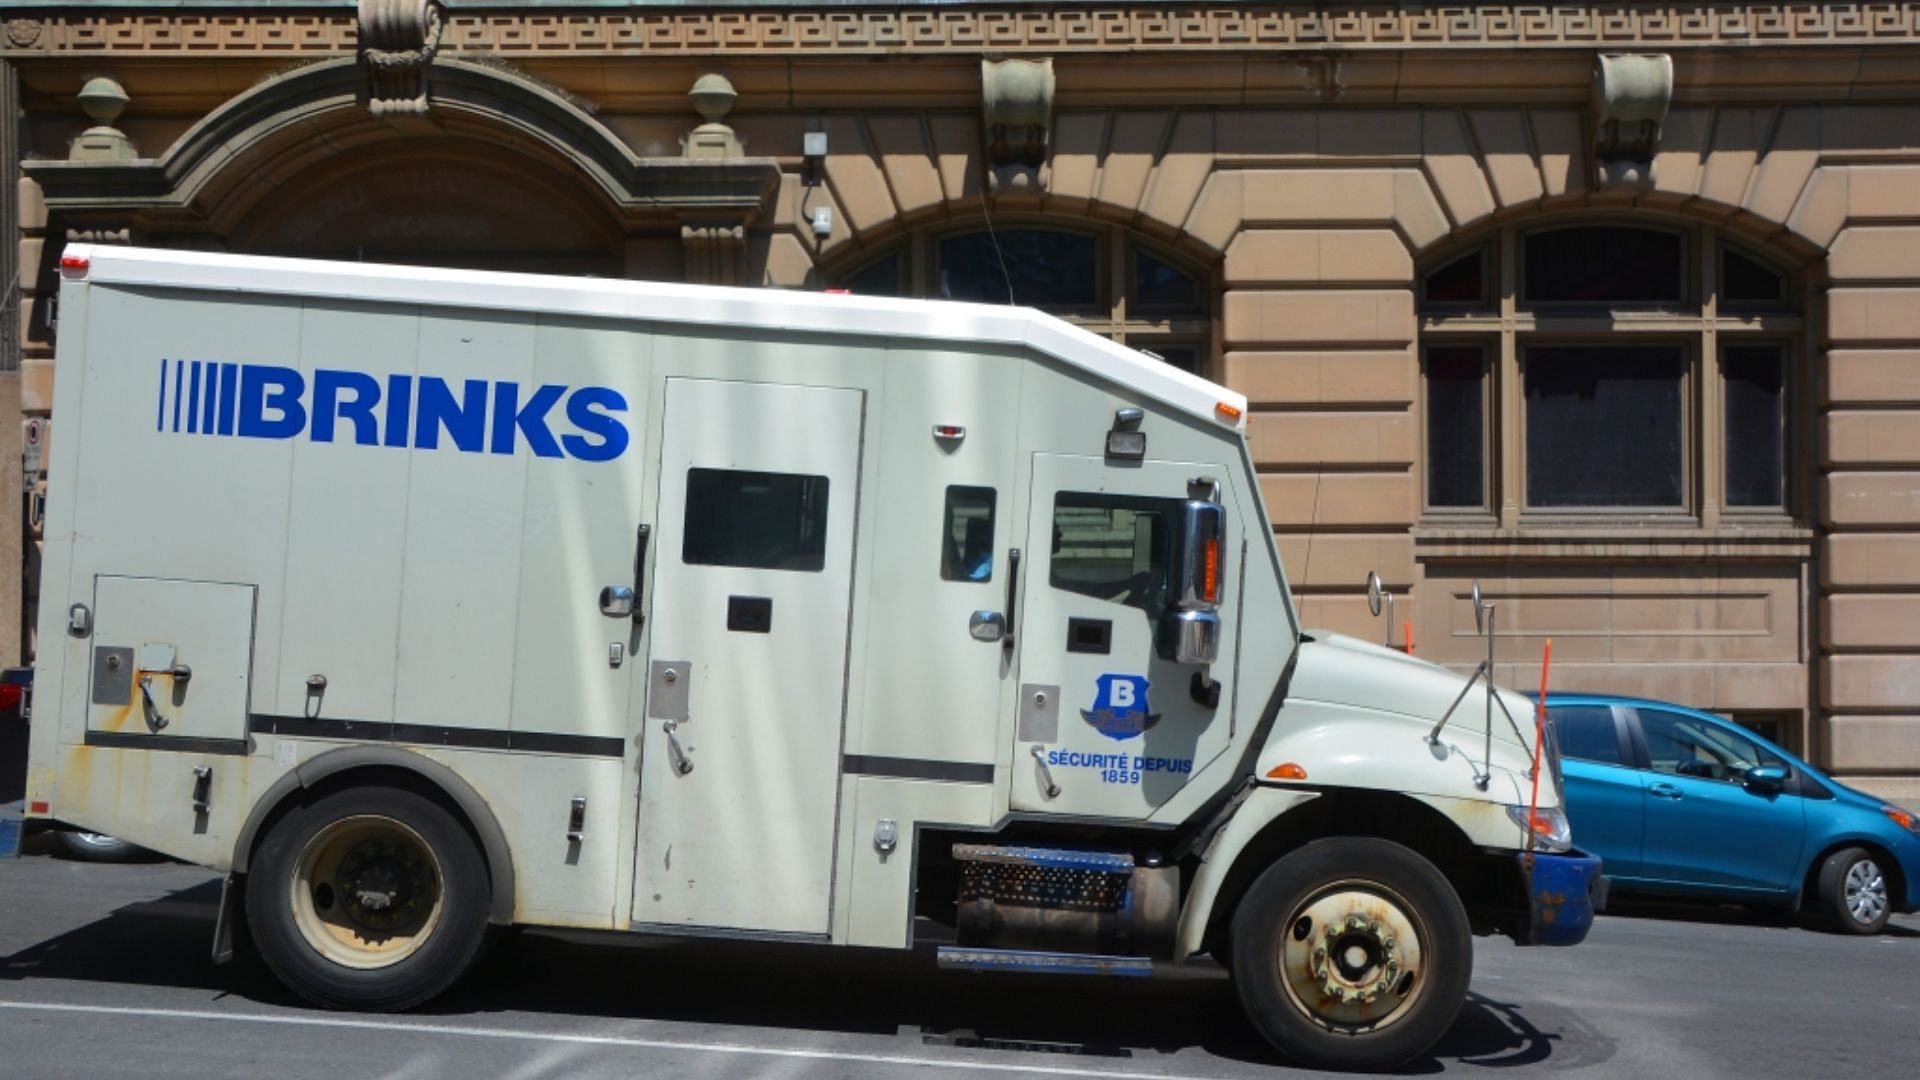 California robbers stole more than $100 million worth of jewelry from an armored Brinks security vehicle on Monday (Image via Shutterstock)